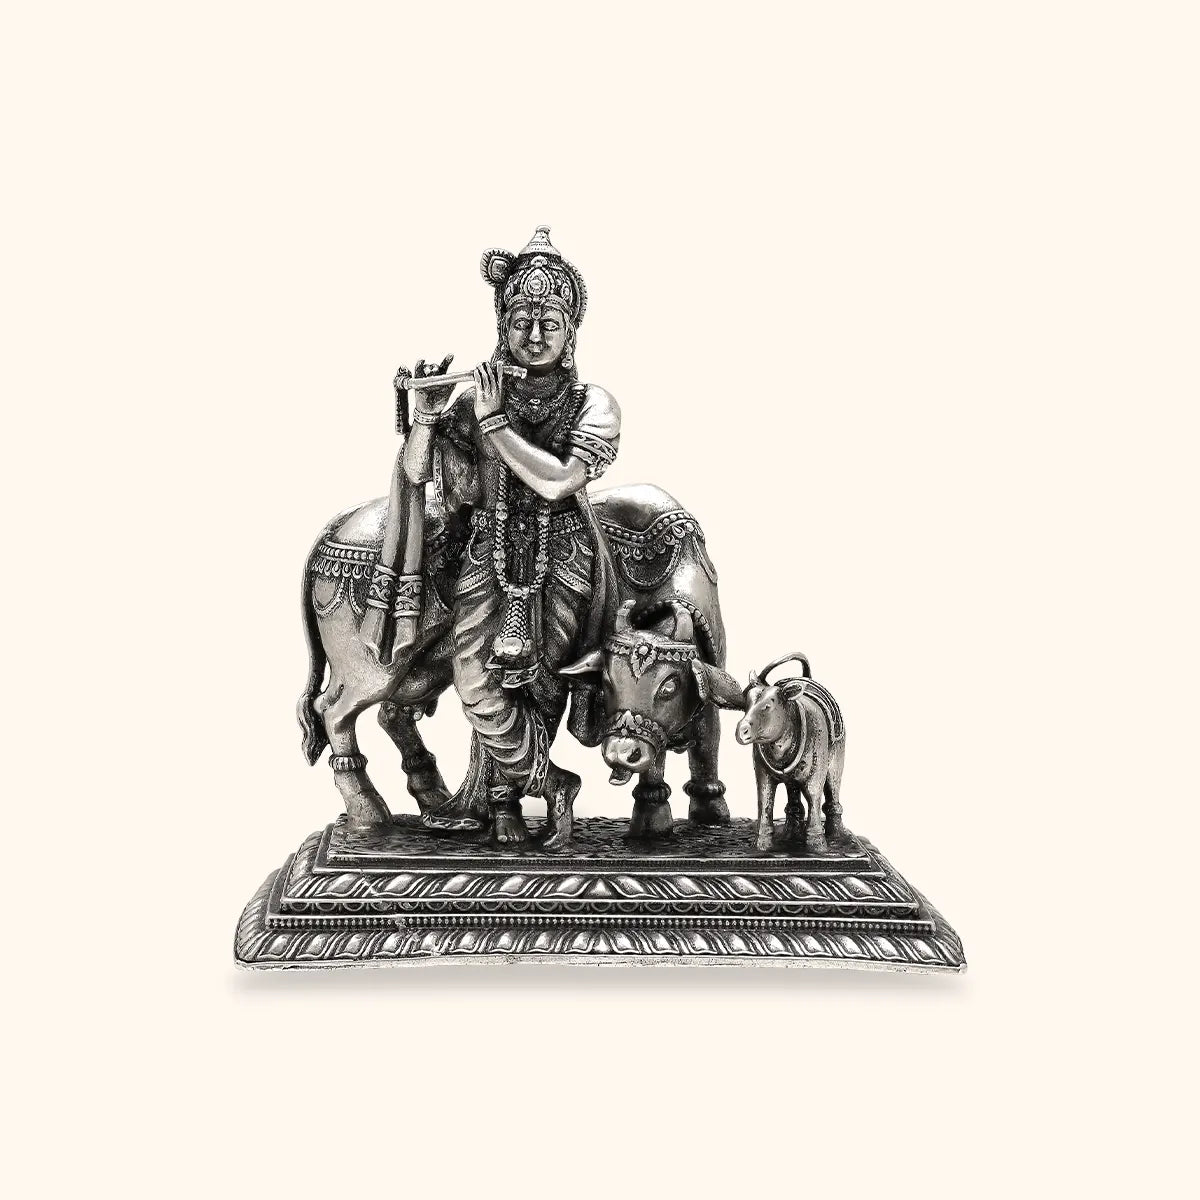 925 Antique Silver Matte Krishna Idol with Rhodium and Lacquer coating for Anti-tarnish.